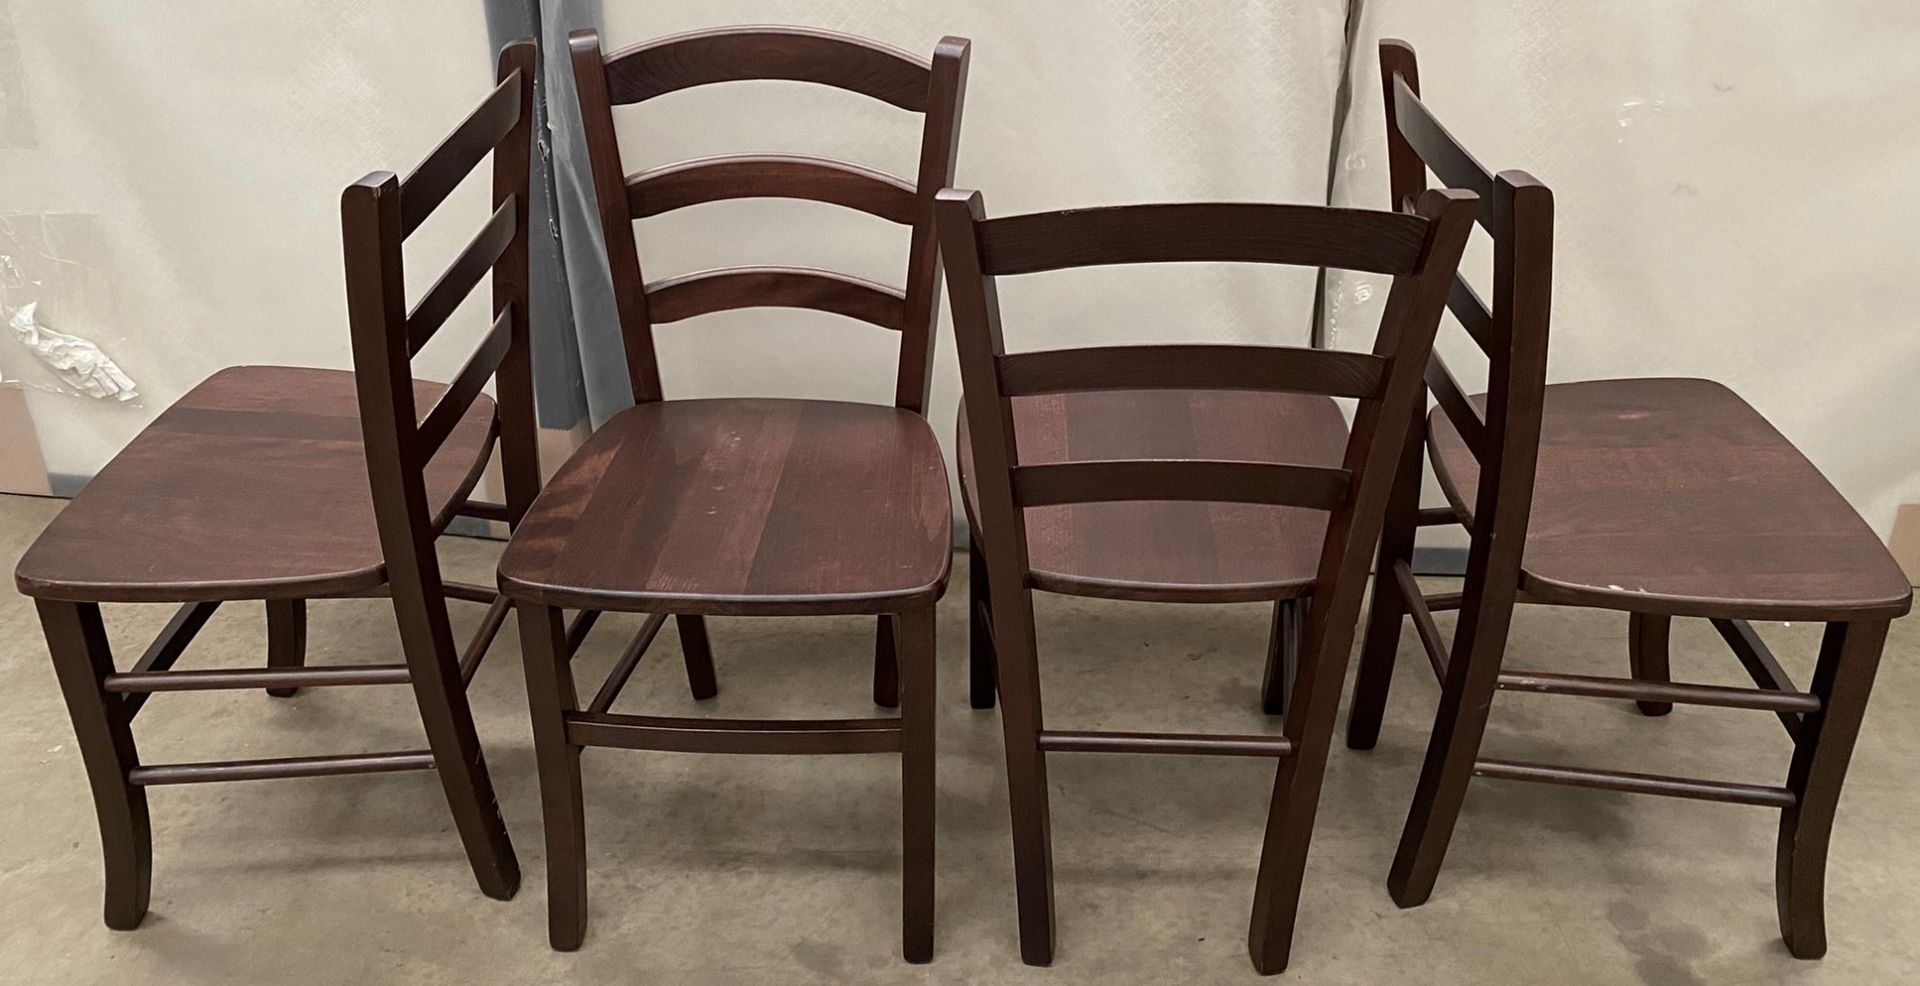 4 x Dark Wood Ladder Back Dining Chairs - Image 2 of 2